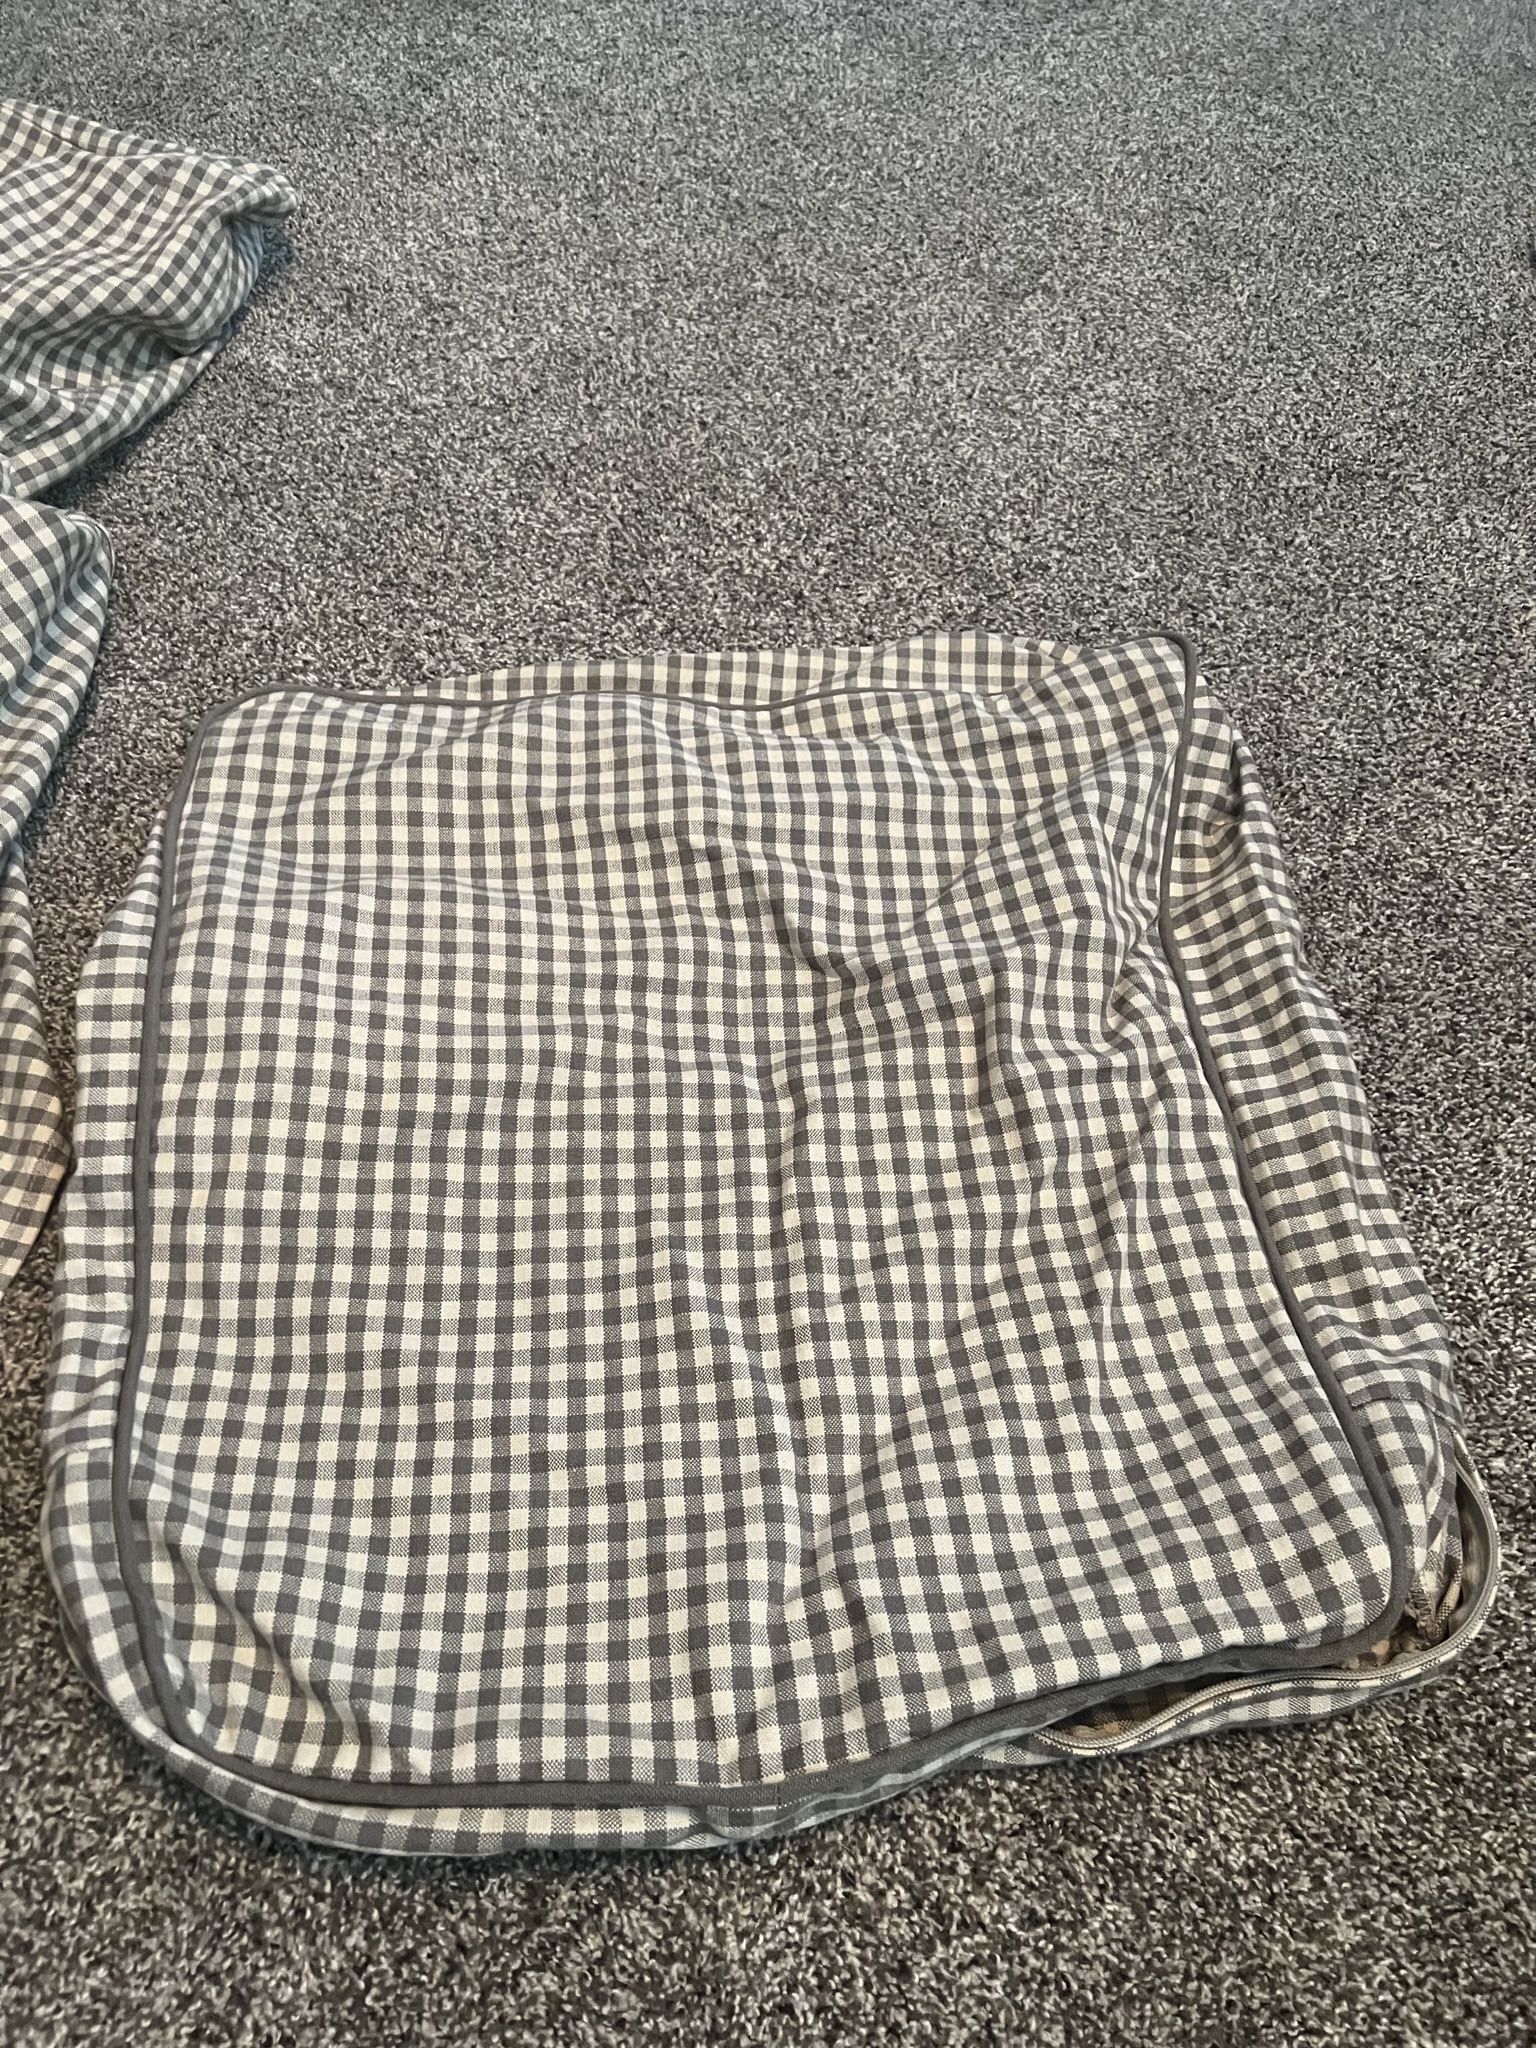 Ikea Jennylund Chair Cover